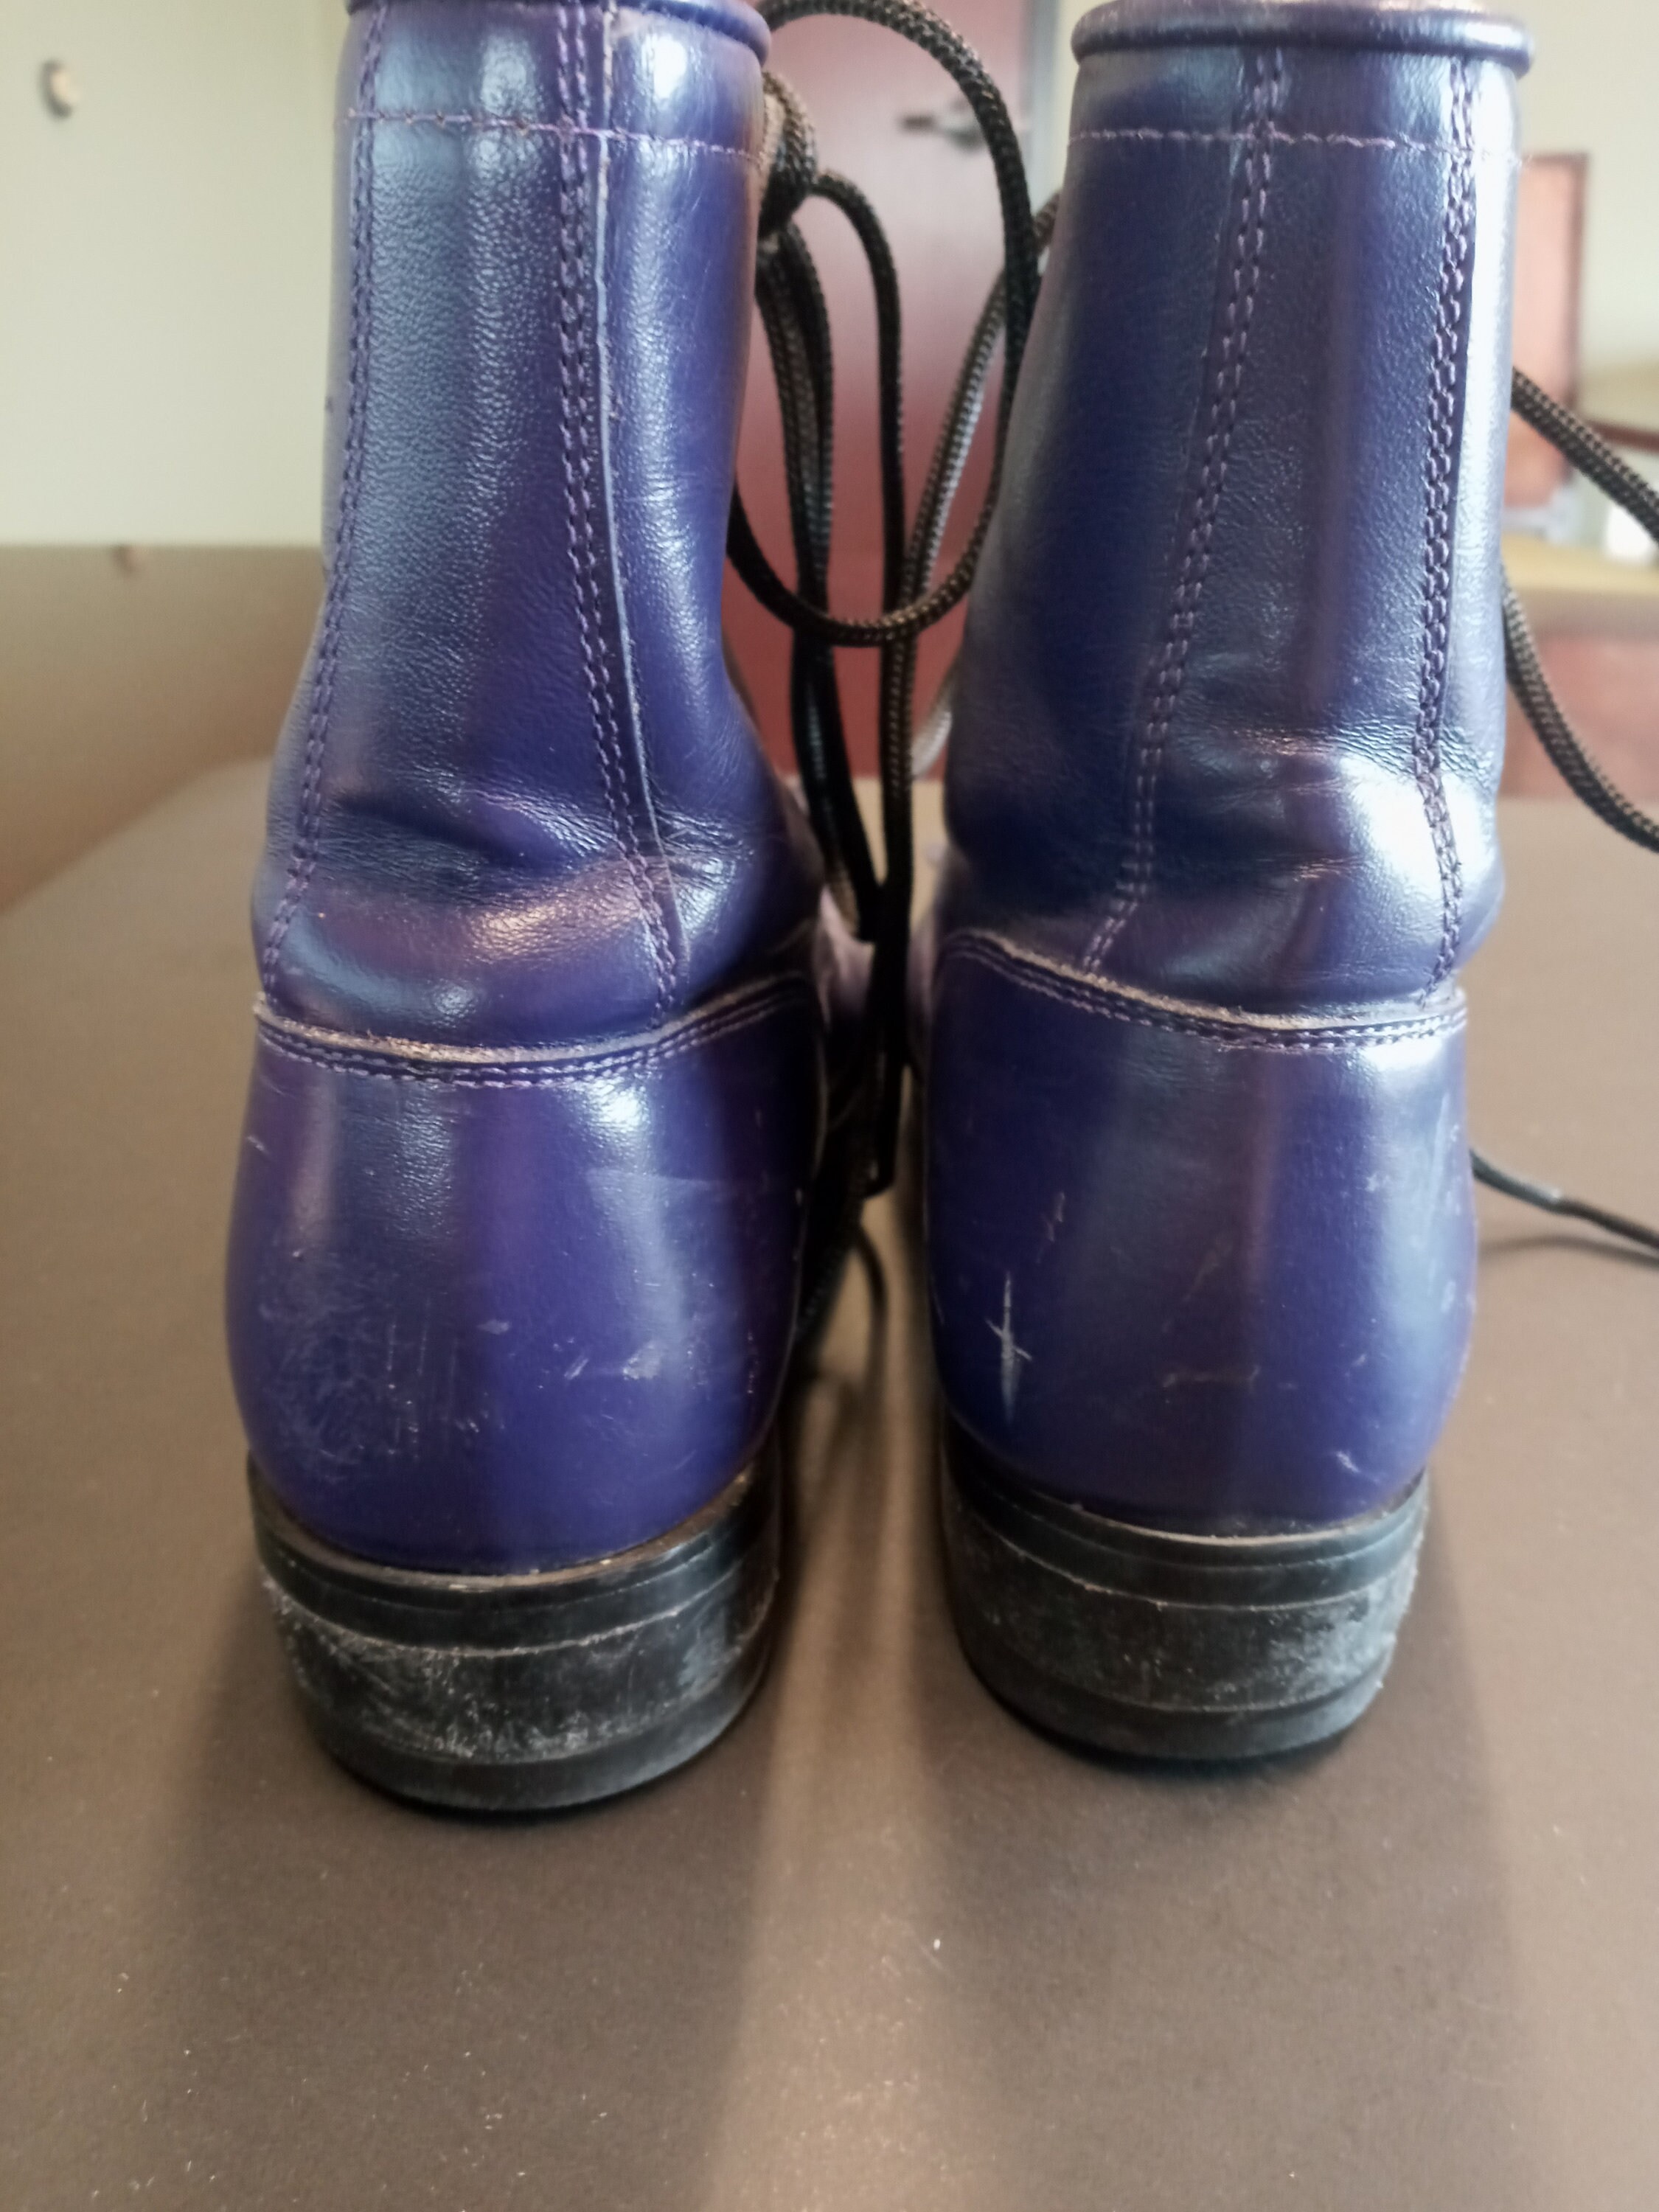 Vintage JUSTIN boots in purple size 7 narrow boot womens | Etsy